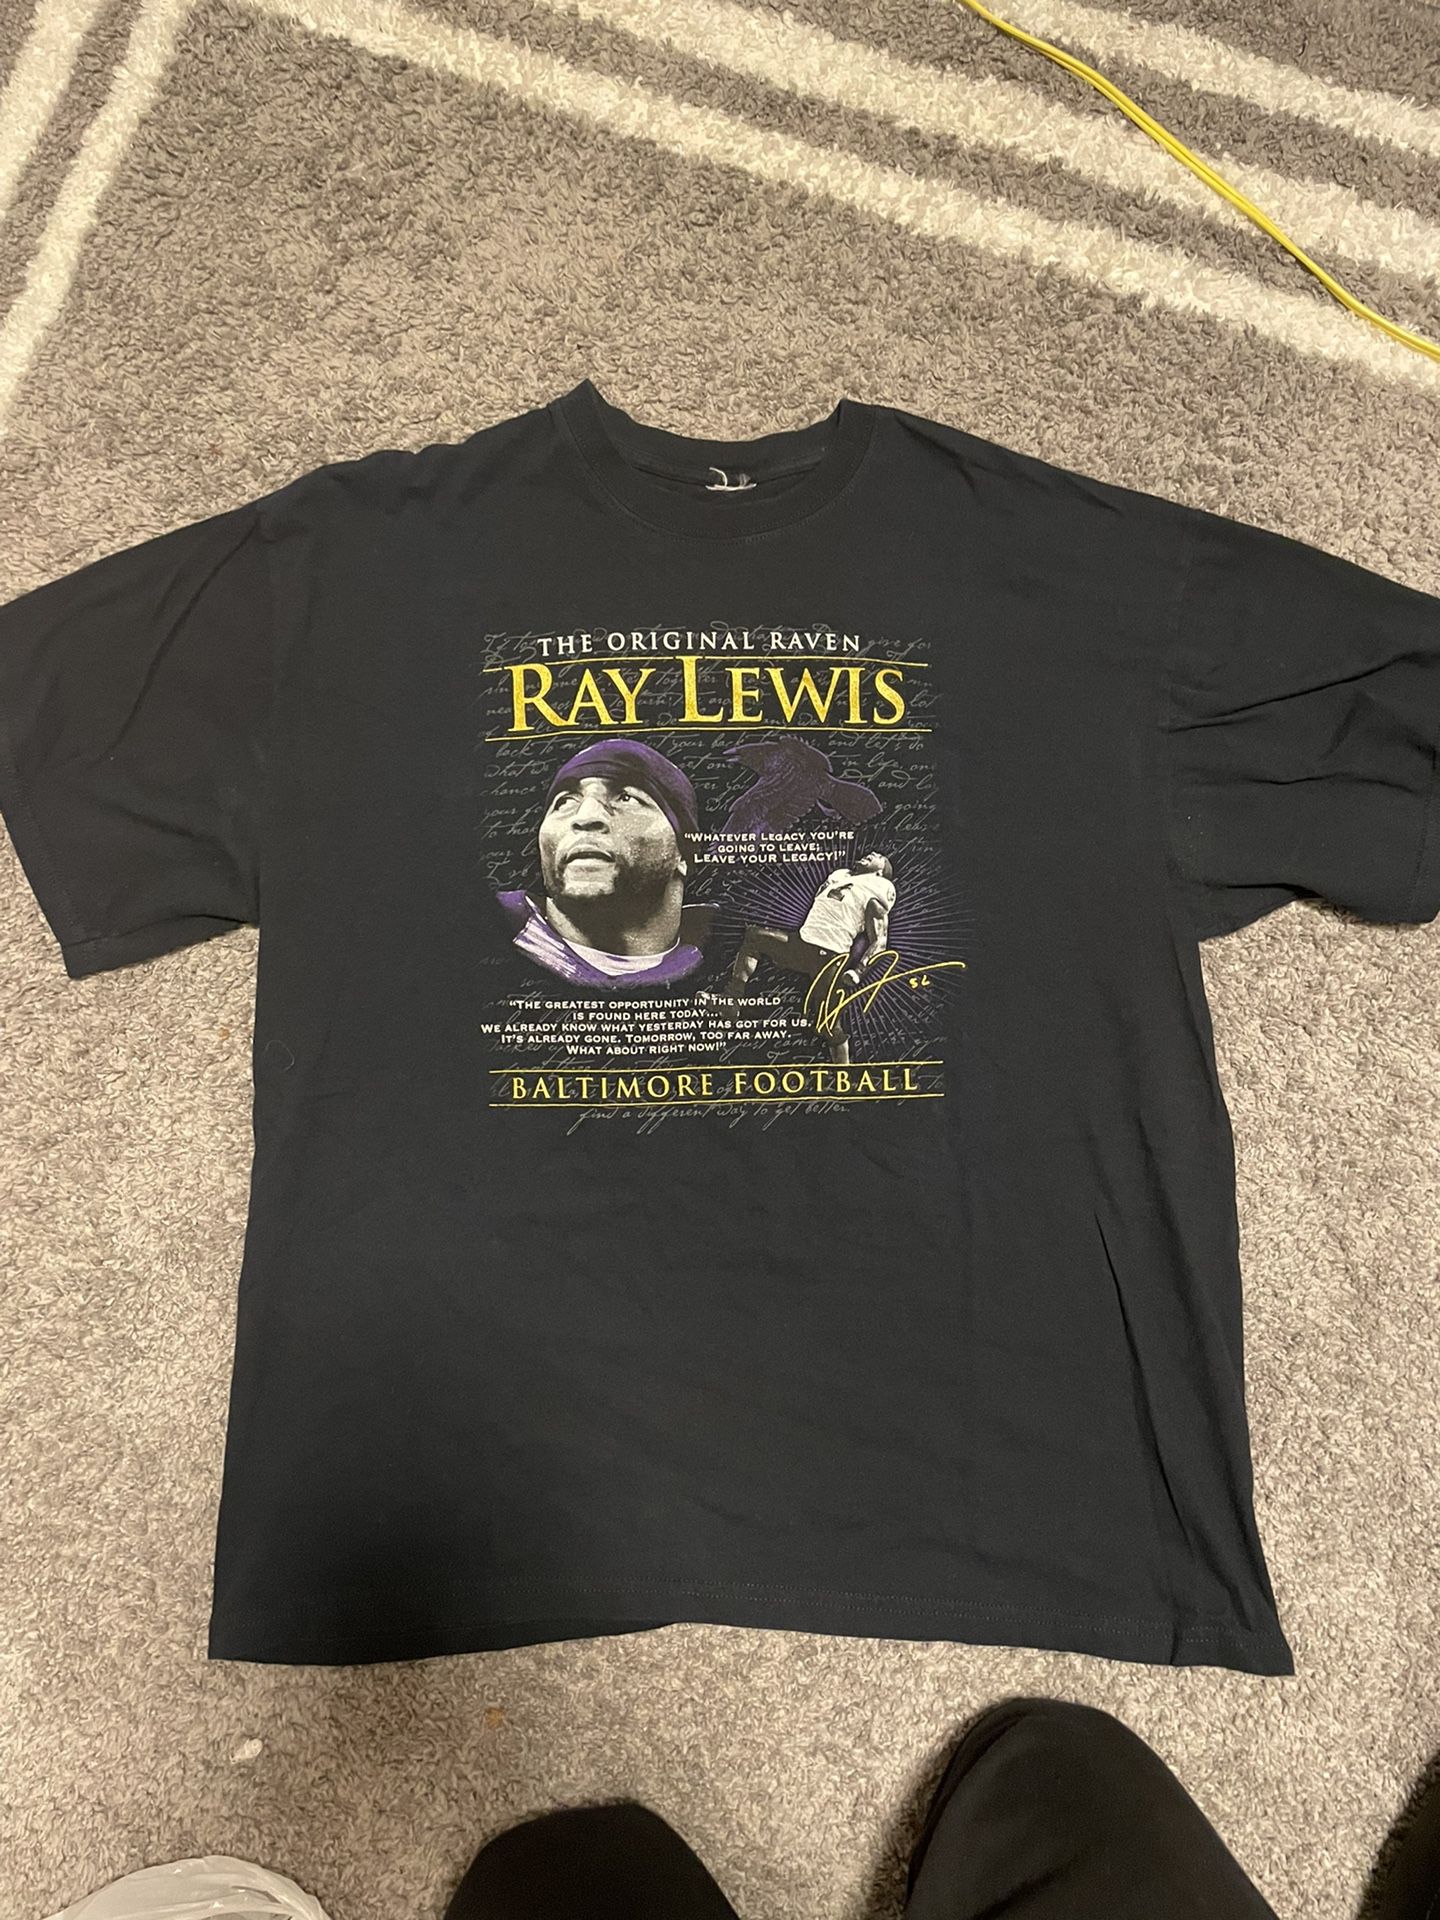 Overstige Ananiver gået vanvittigt The Original Raven Ray Lewis Tee Shirt for Sale in Baltimore, MD - OfferUp